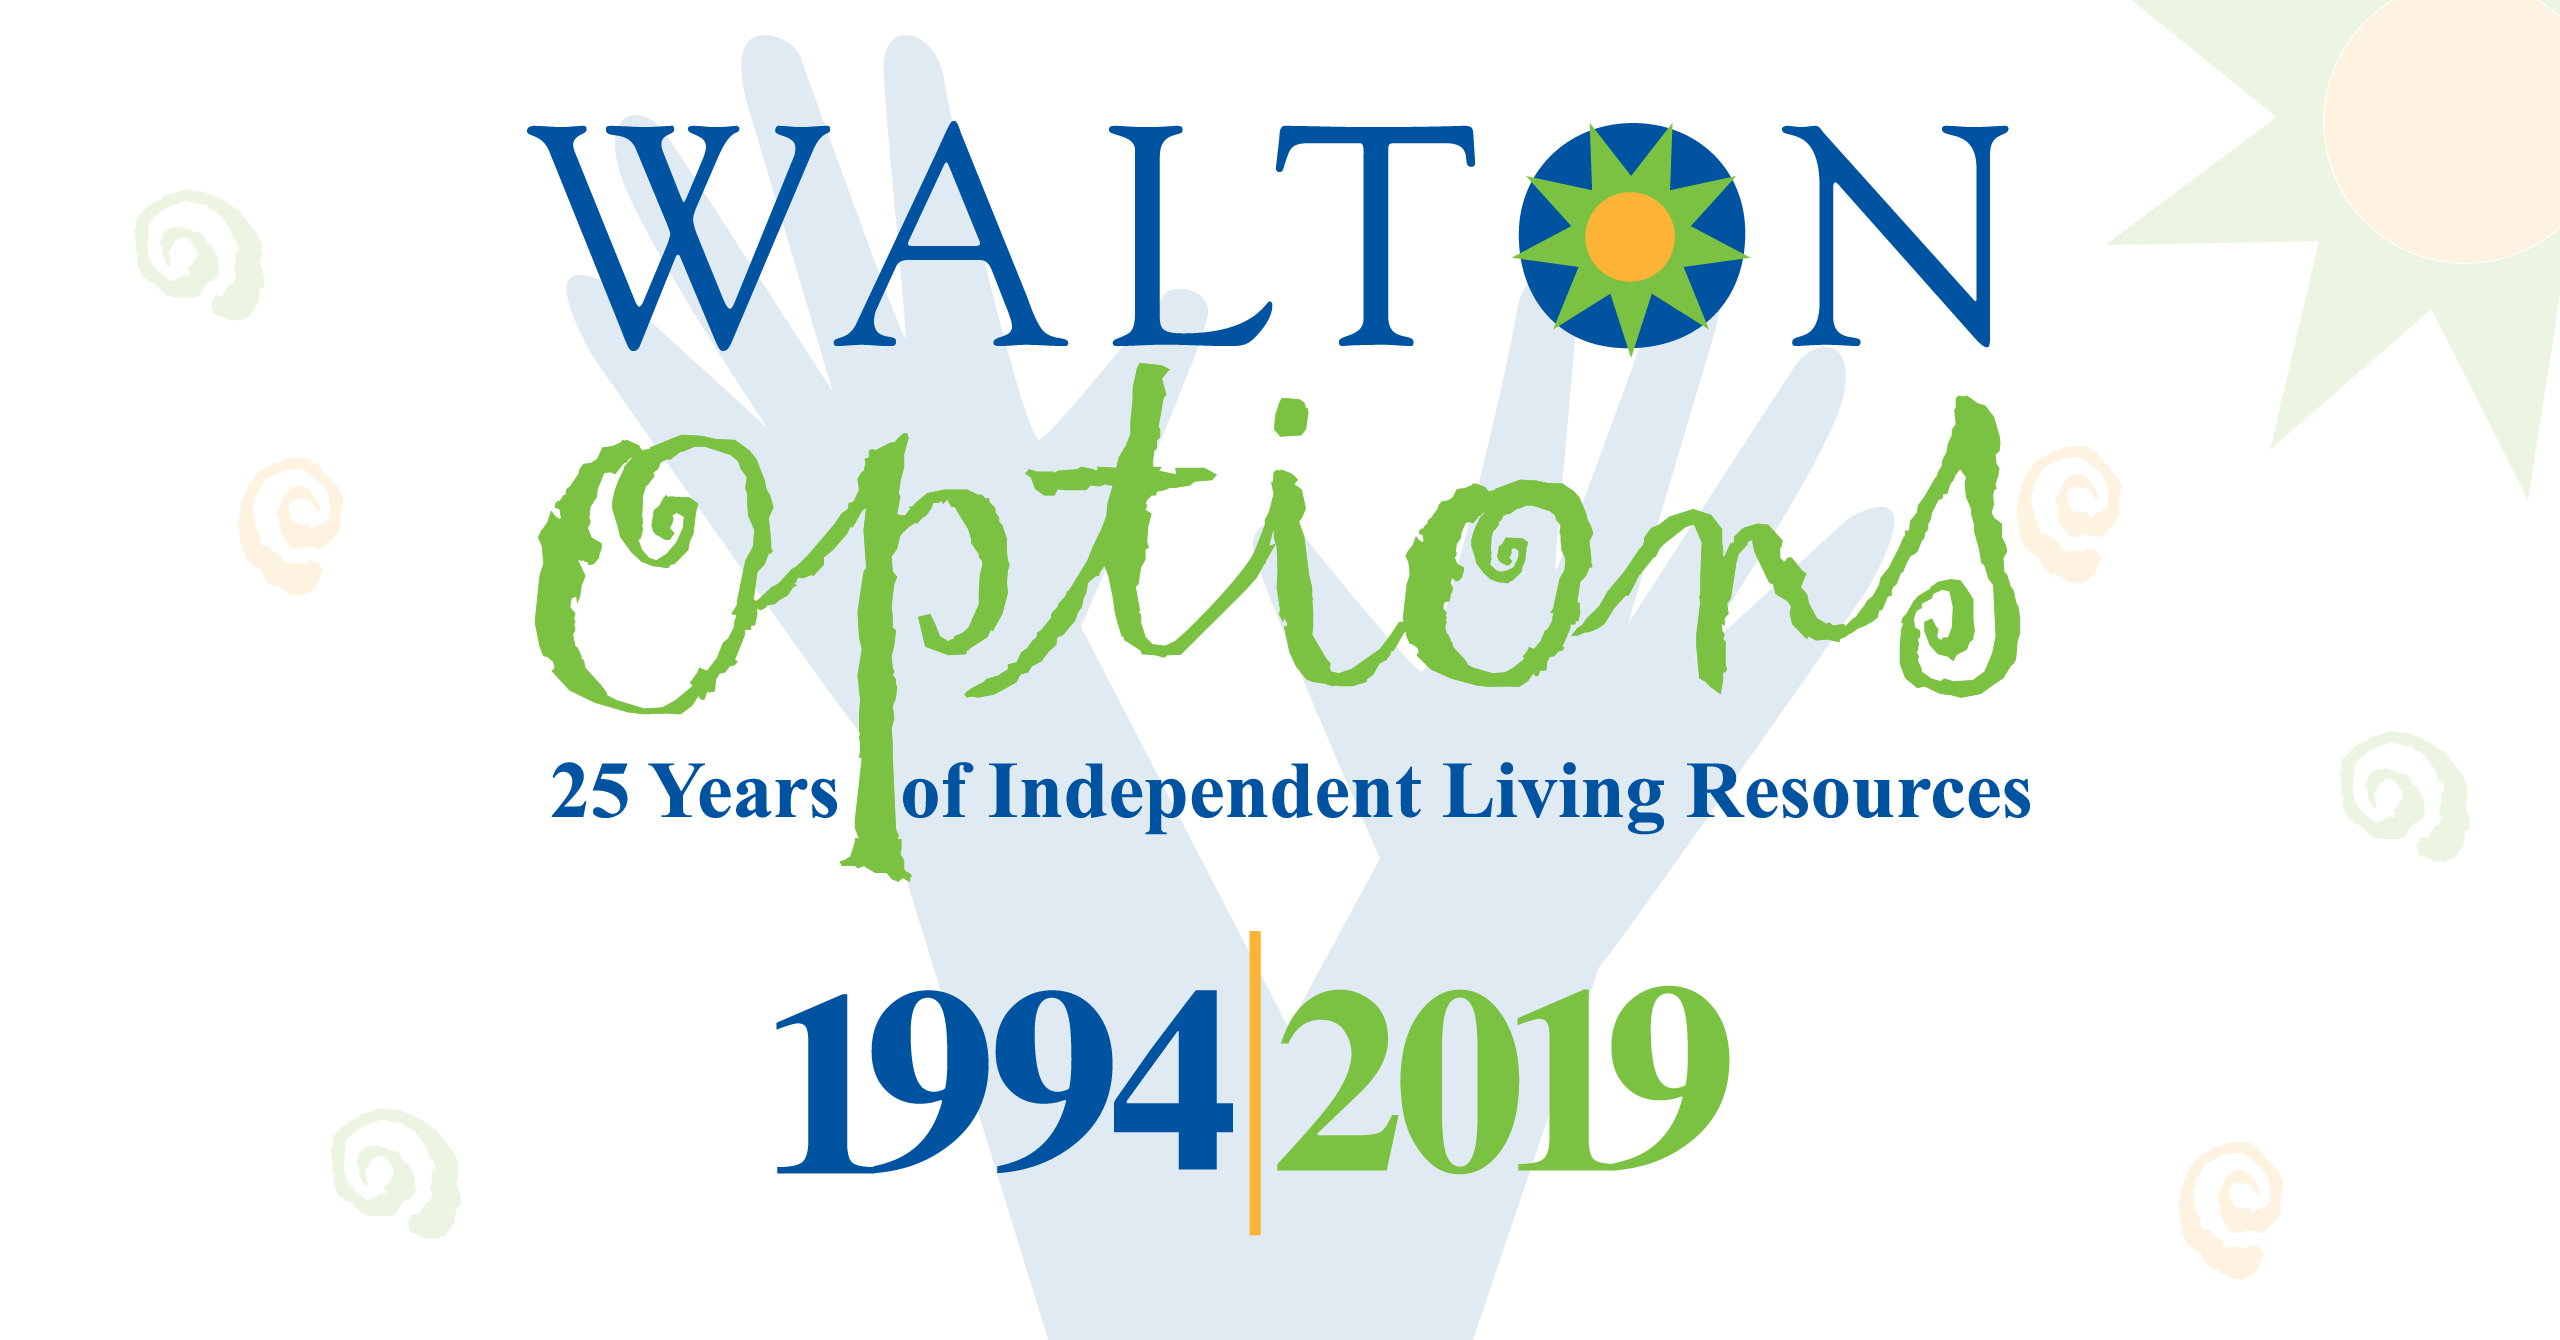 Image Header: Walton Options Anniversary Logo with tag line, 25 Years of Independent Living Resources, 1994-2019